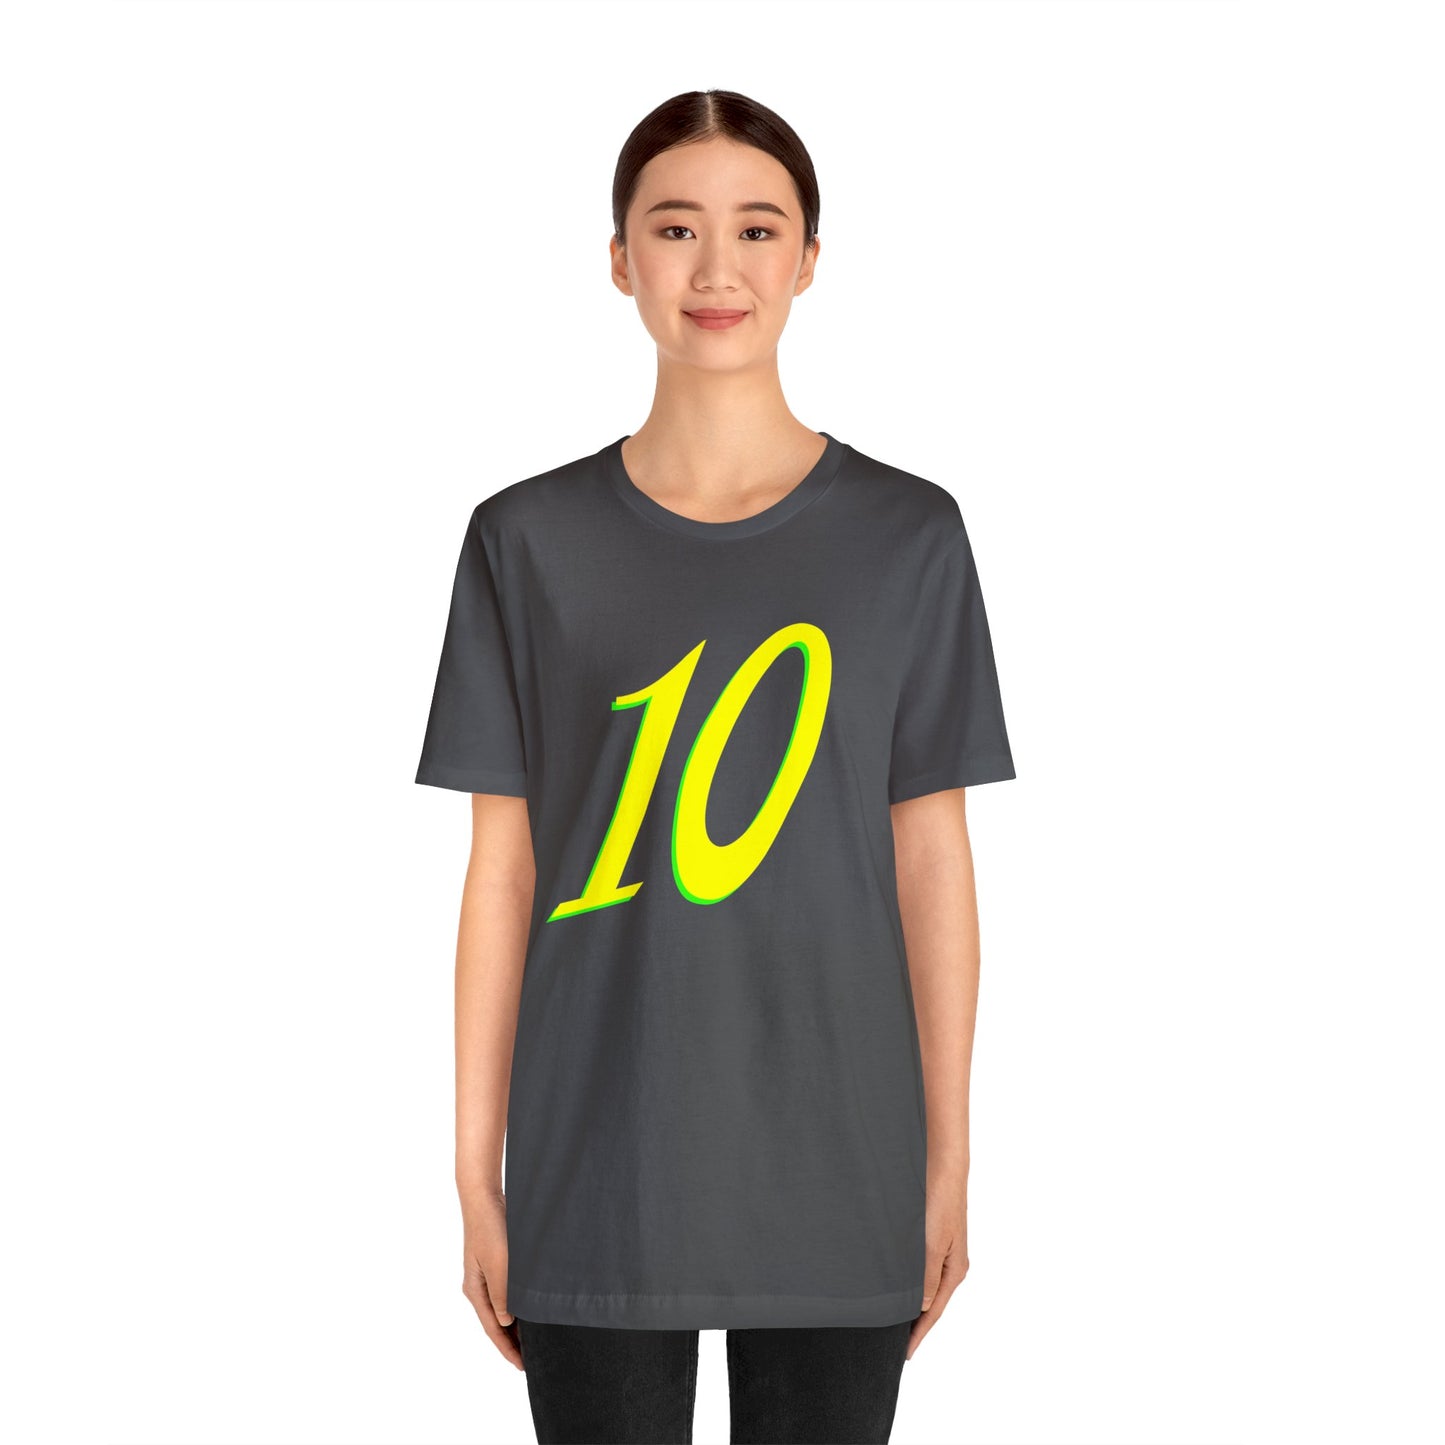 Number 10 Design - Soft Cotton Tee for birthdays and celebrations, Gift for friends and family, Multiple Options by clothezy.com in Asphalt Size Medium - Buy Now